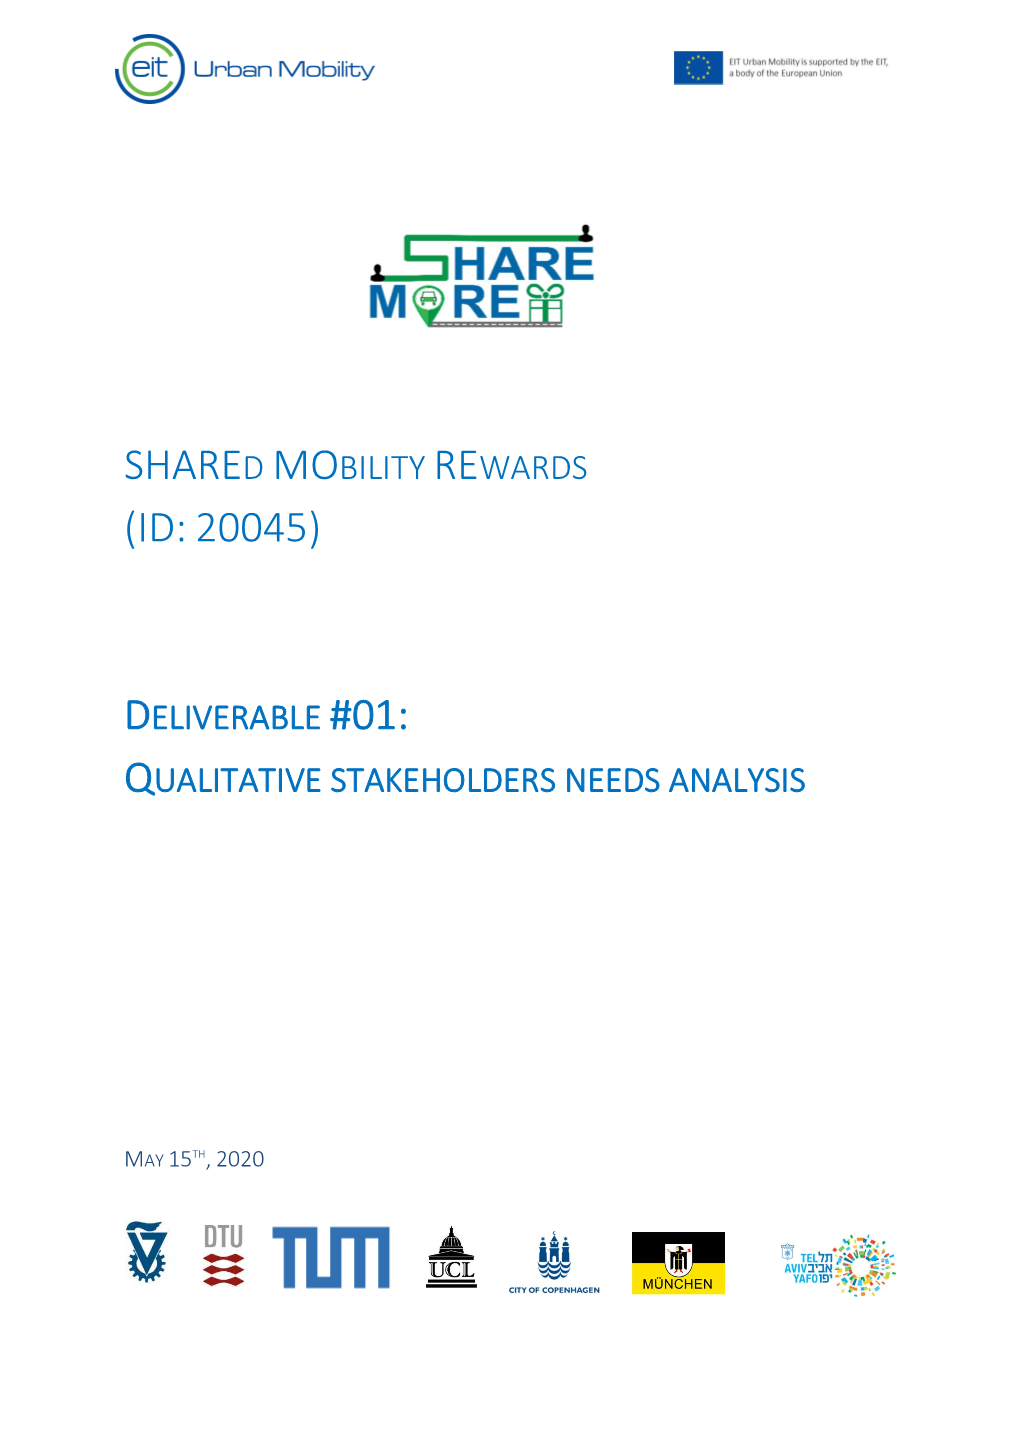 Shared Mobility Rewards (Id:20045) Deliverable